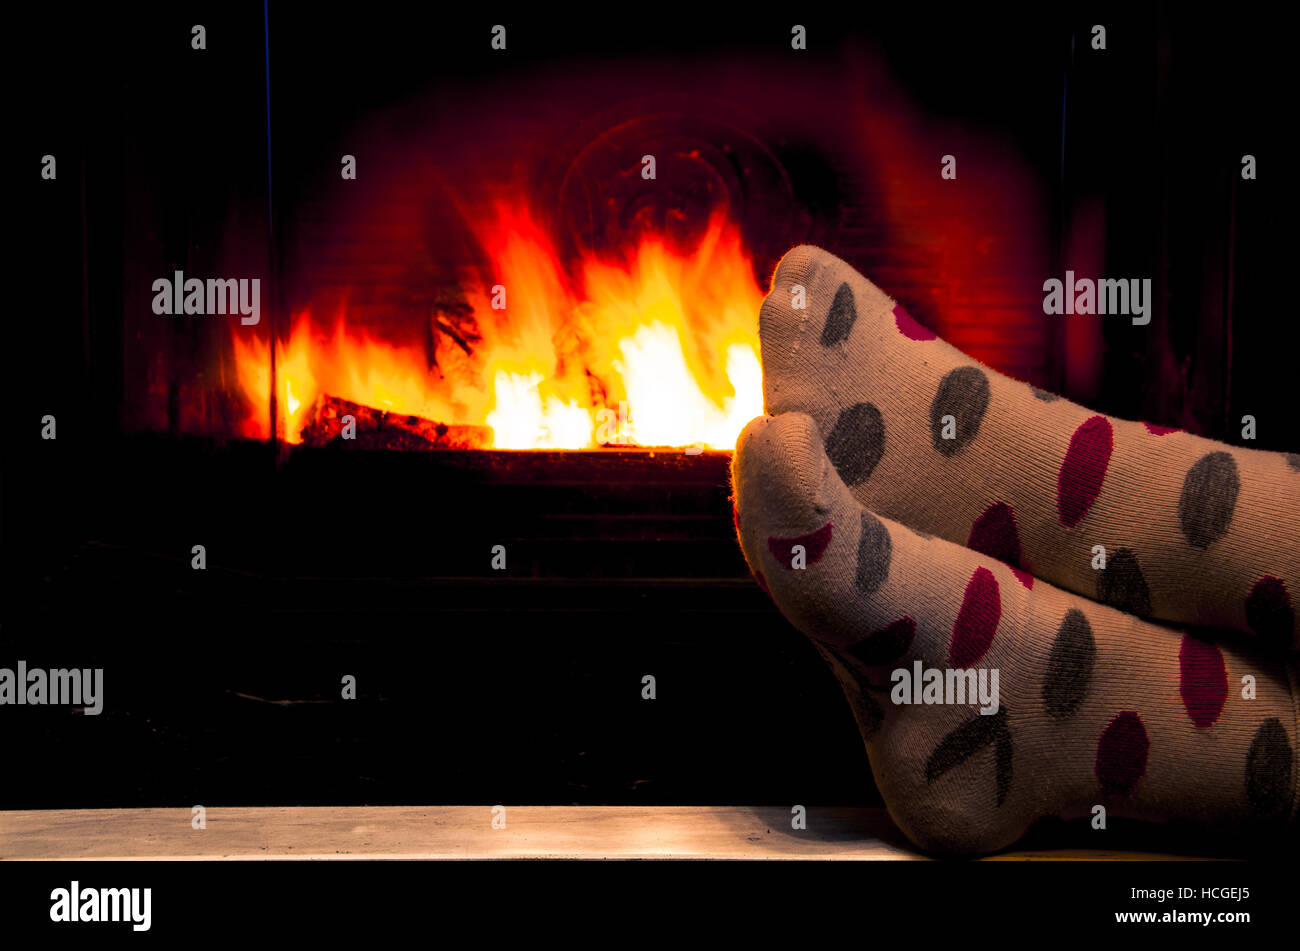 Feet in socks of all the family relaxing and warming by cozy fire Stock Photo